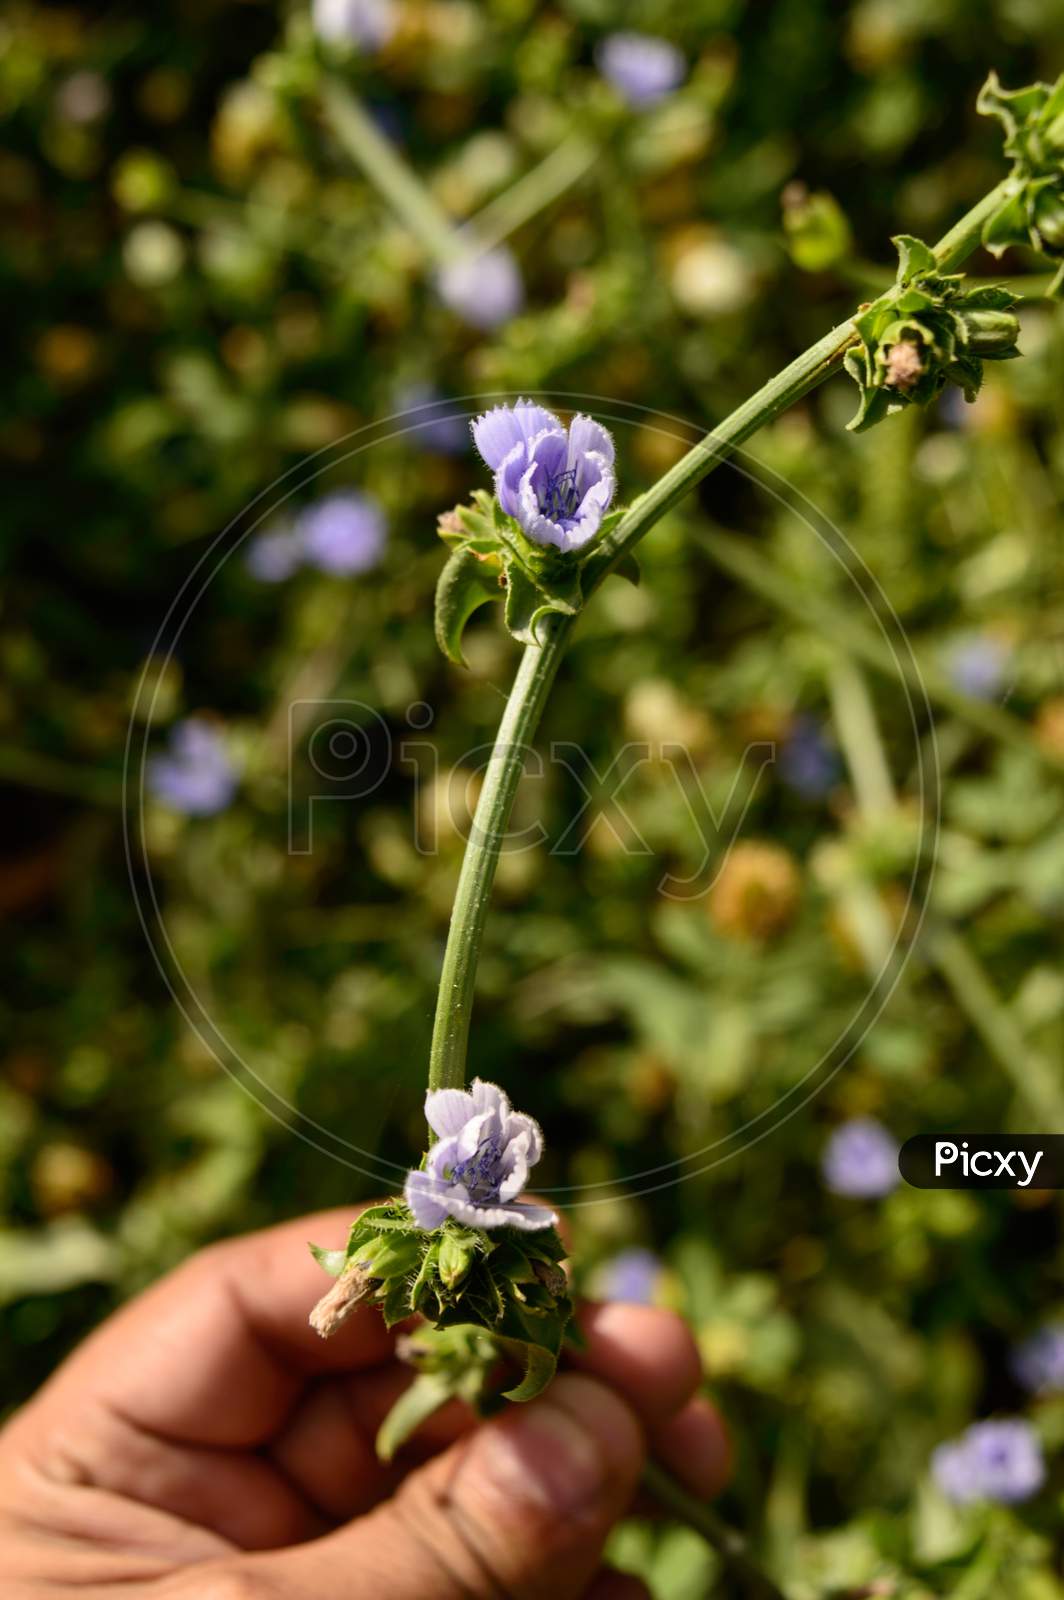 Indian Man Holding Beautiful Blue Indian Flower Fragrance On Side Of Field.